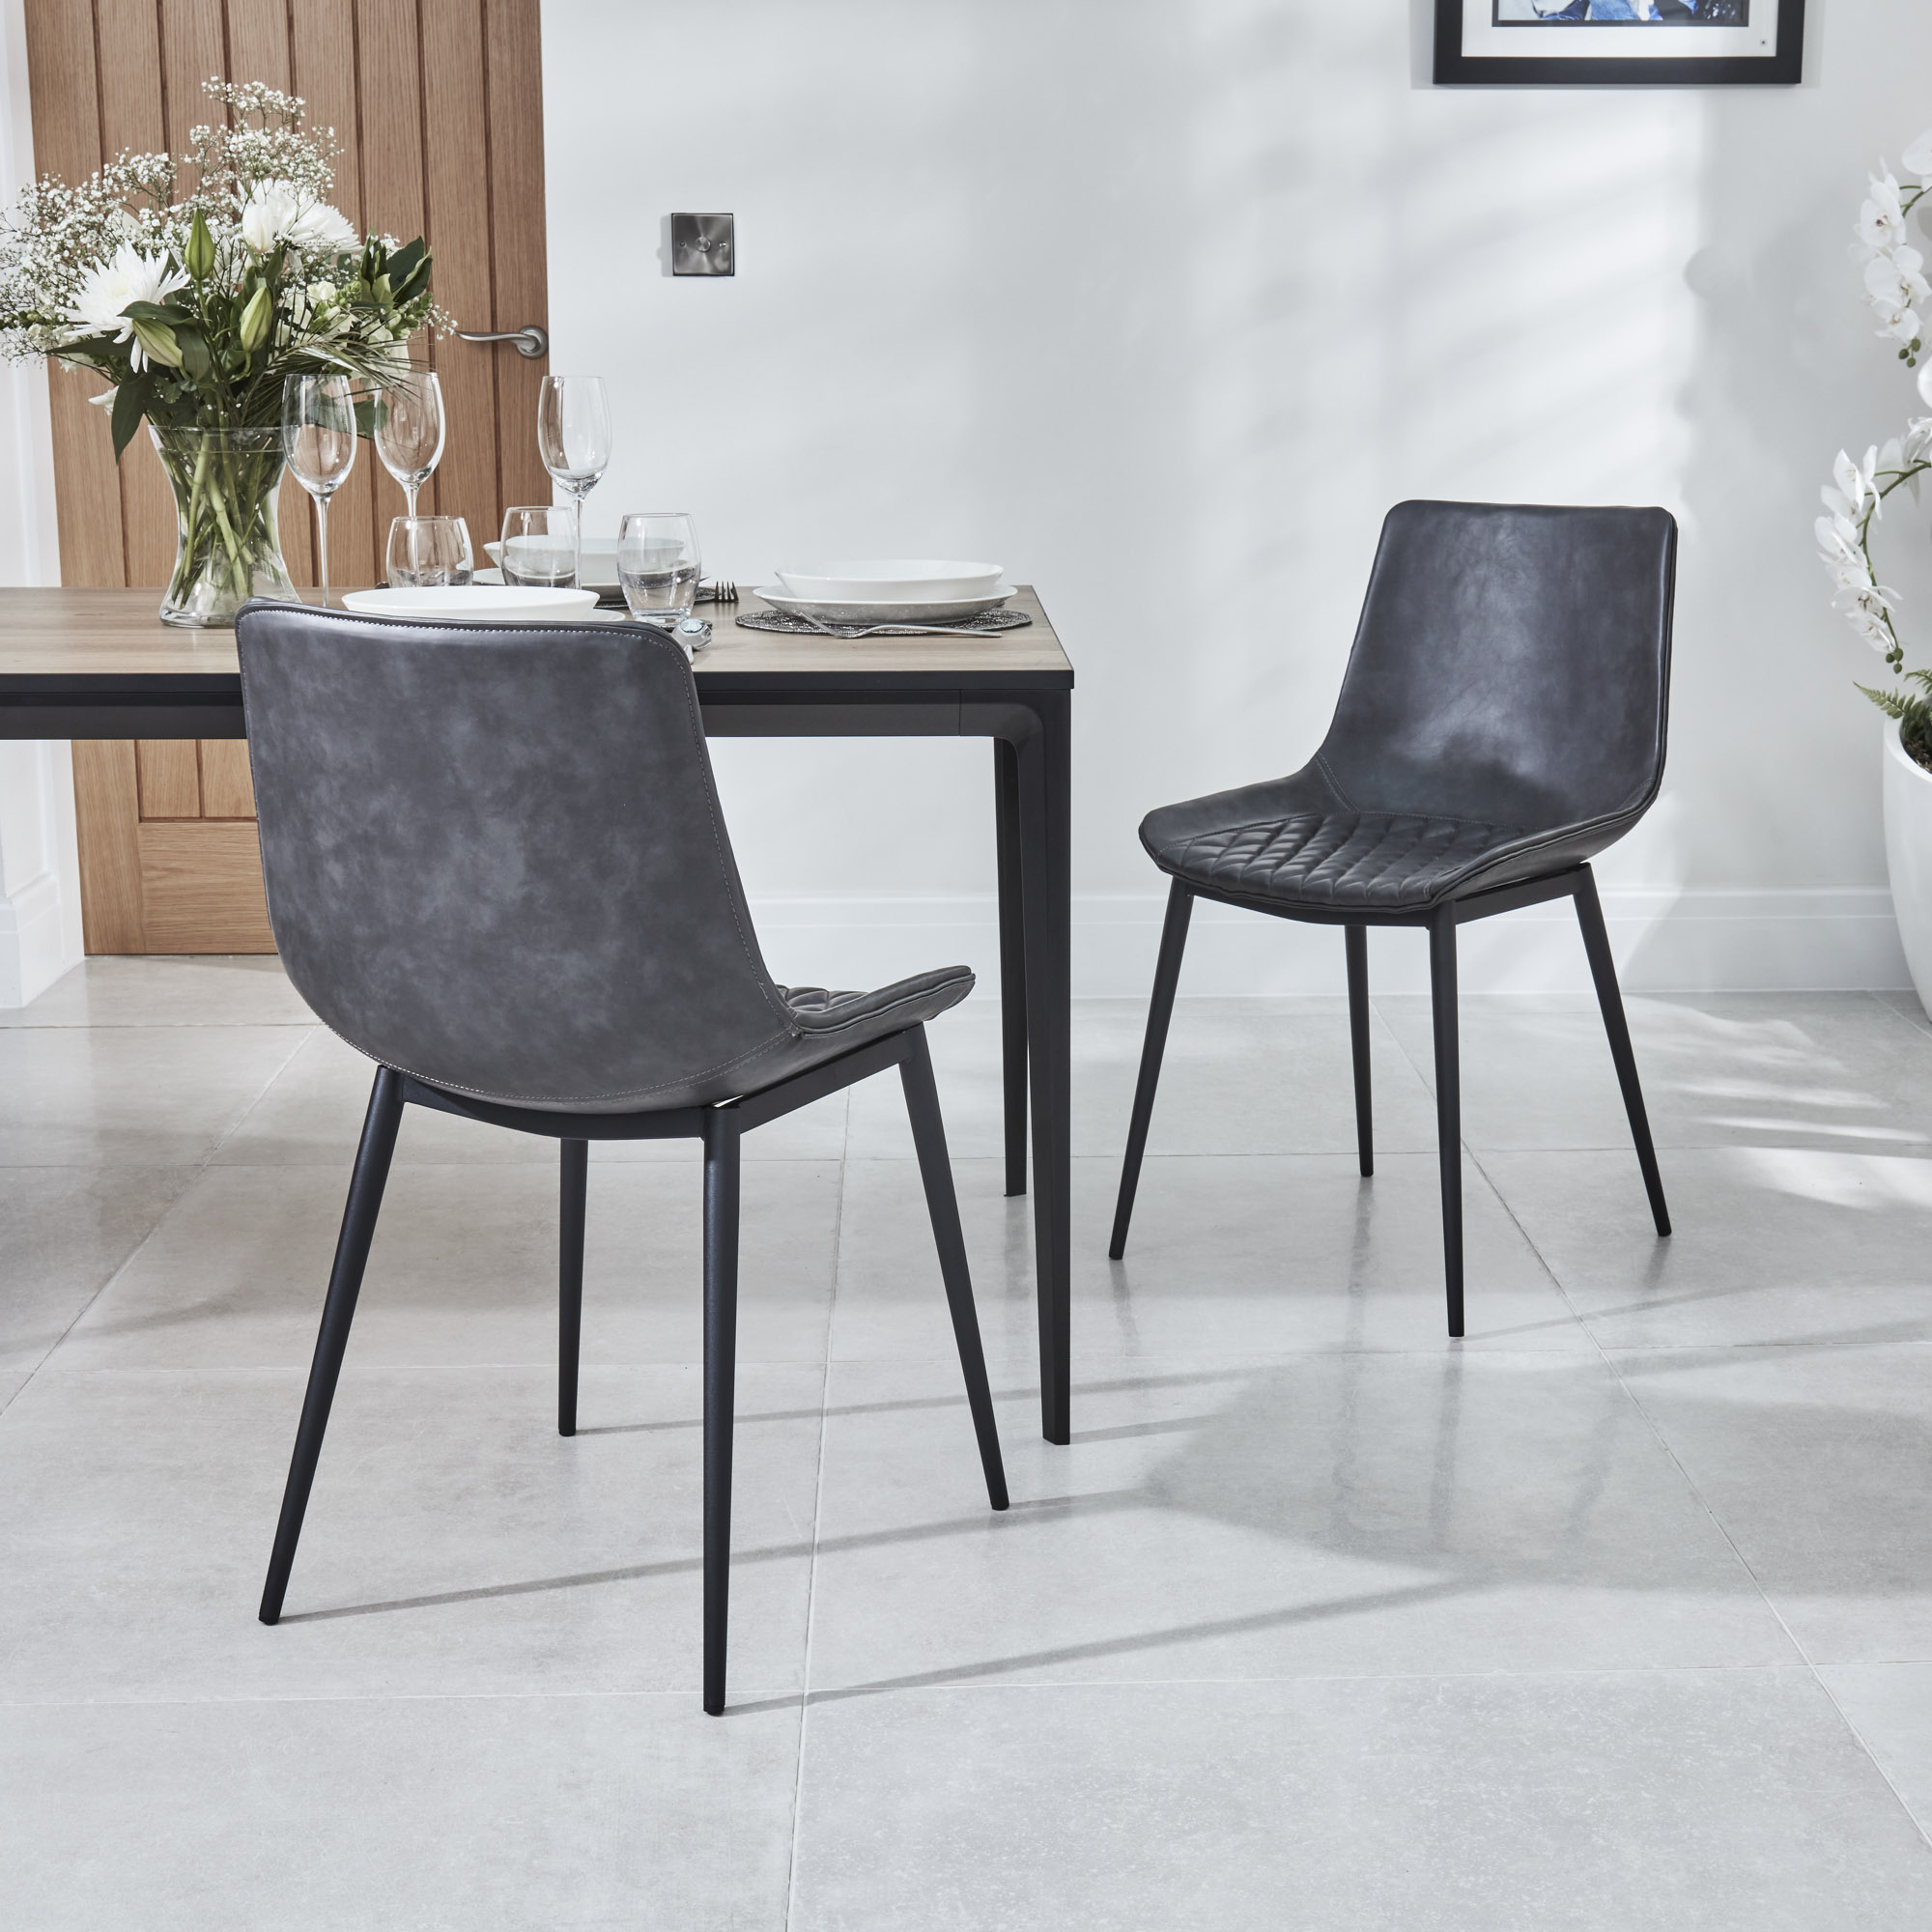 Bellagio 1.6M Grey Sintered Stone Dining Table with 4x Leo Grey Dining Chairs